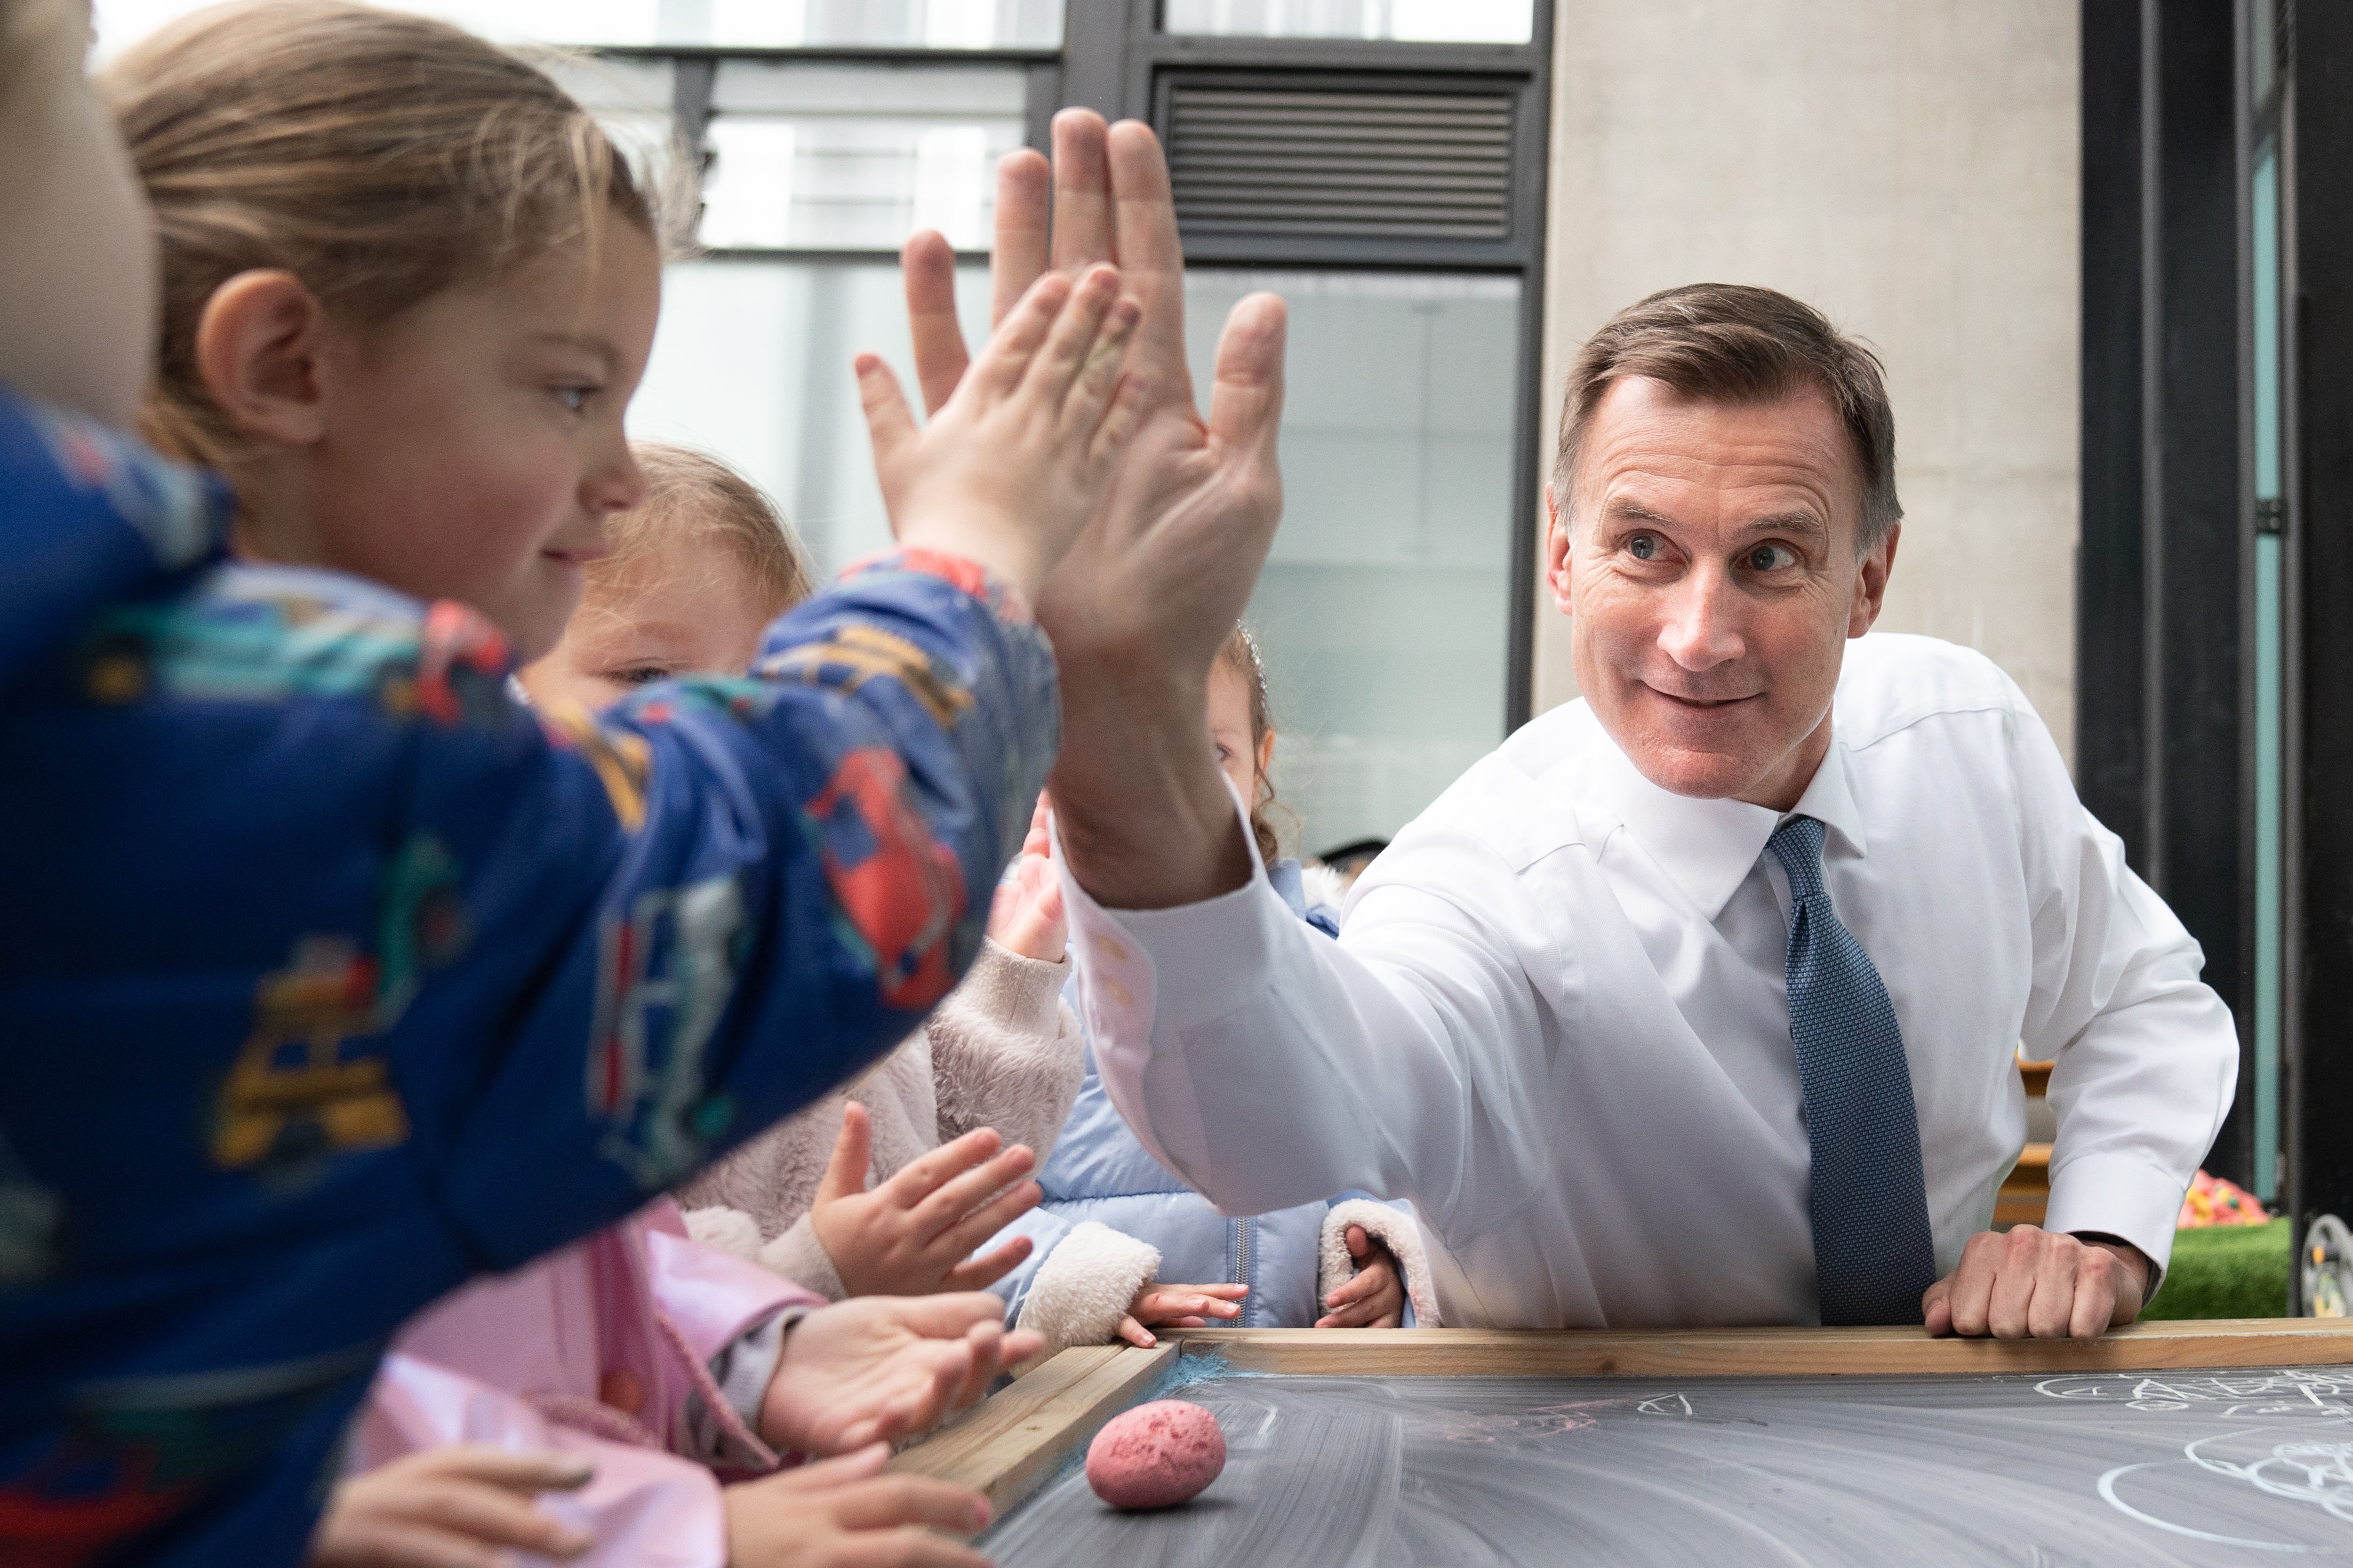 The chancellor announced a rise in the threshold for repayment of child benefit from £50,000 to £60,000 a year